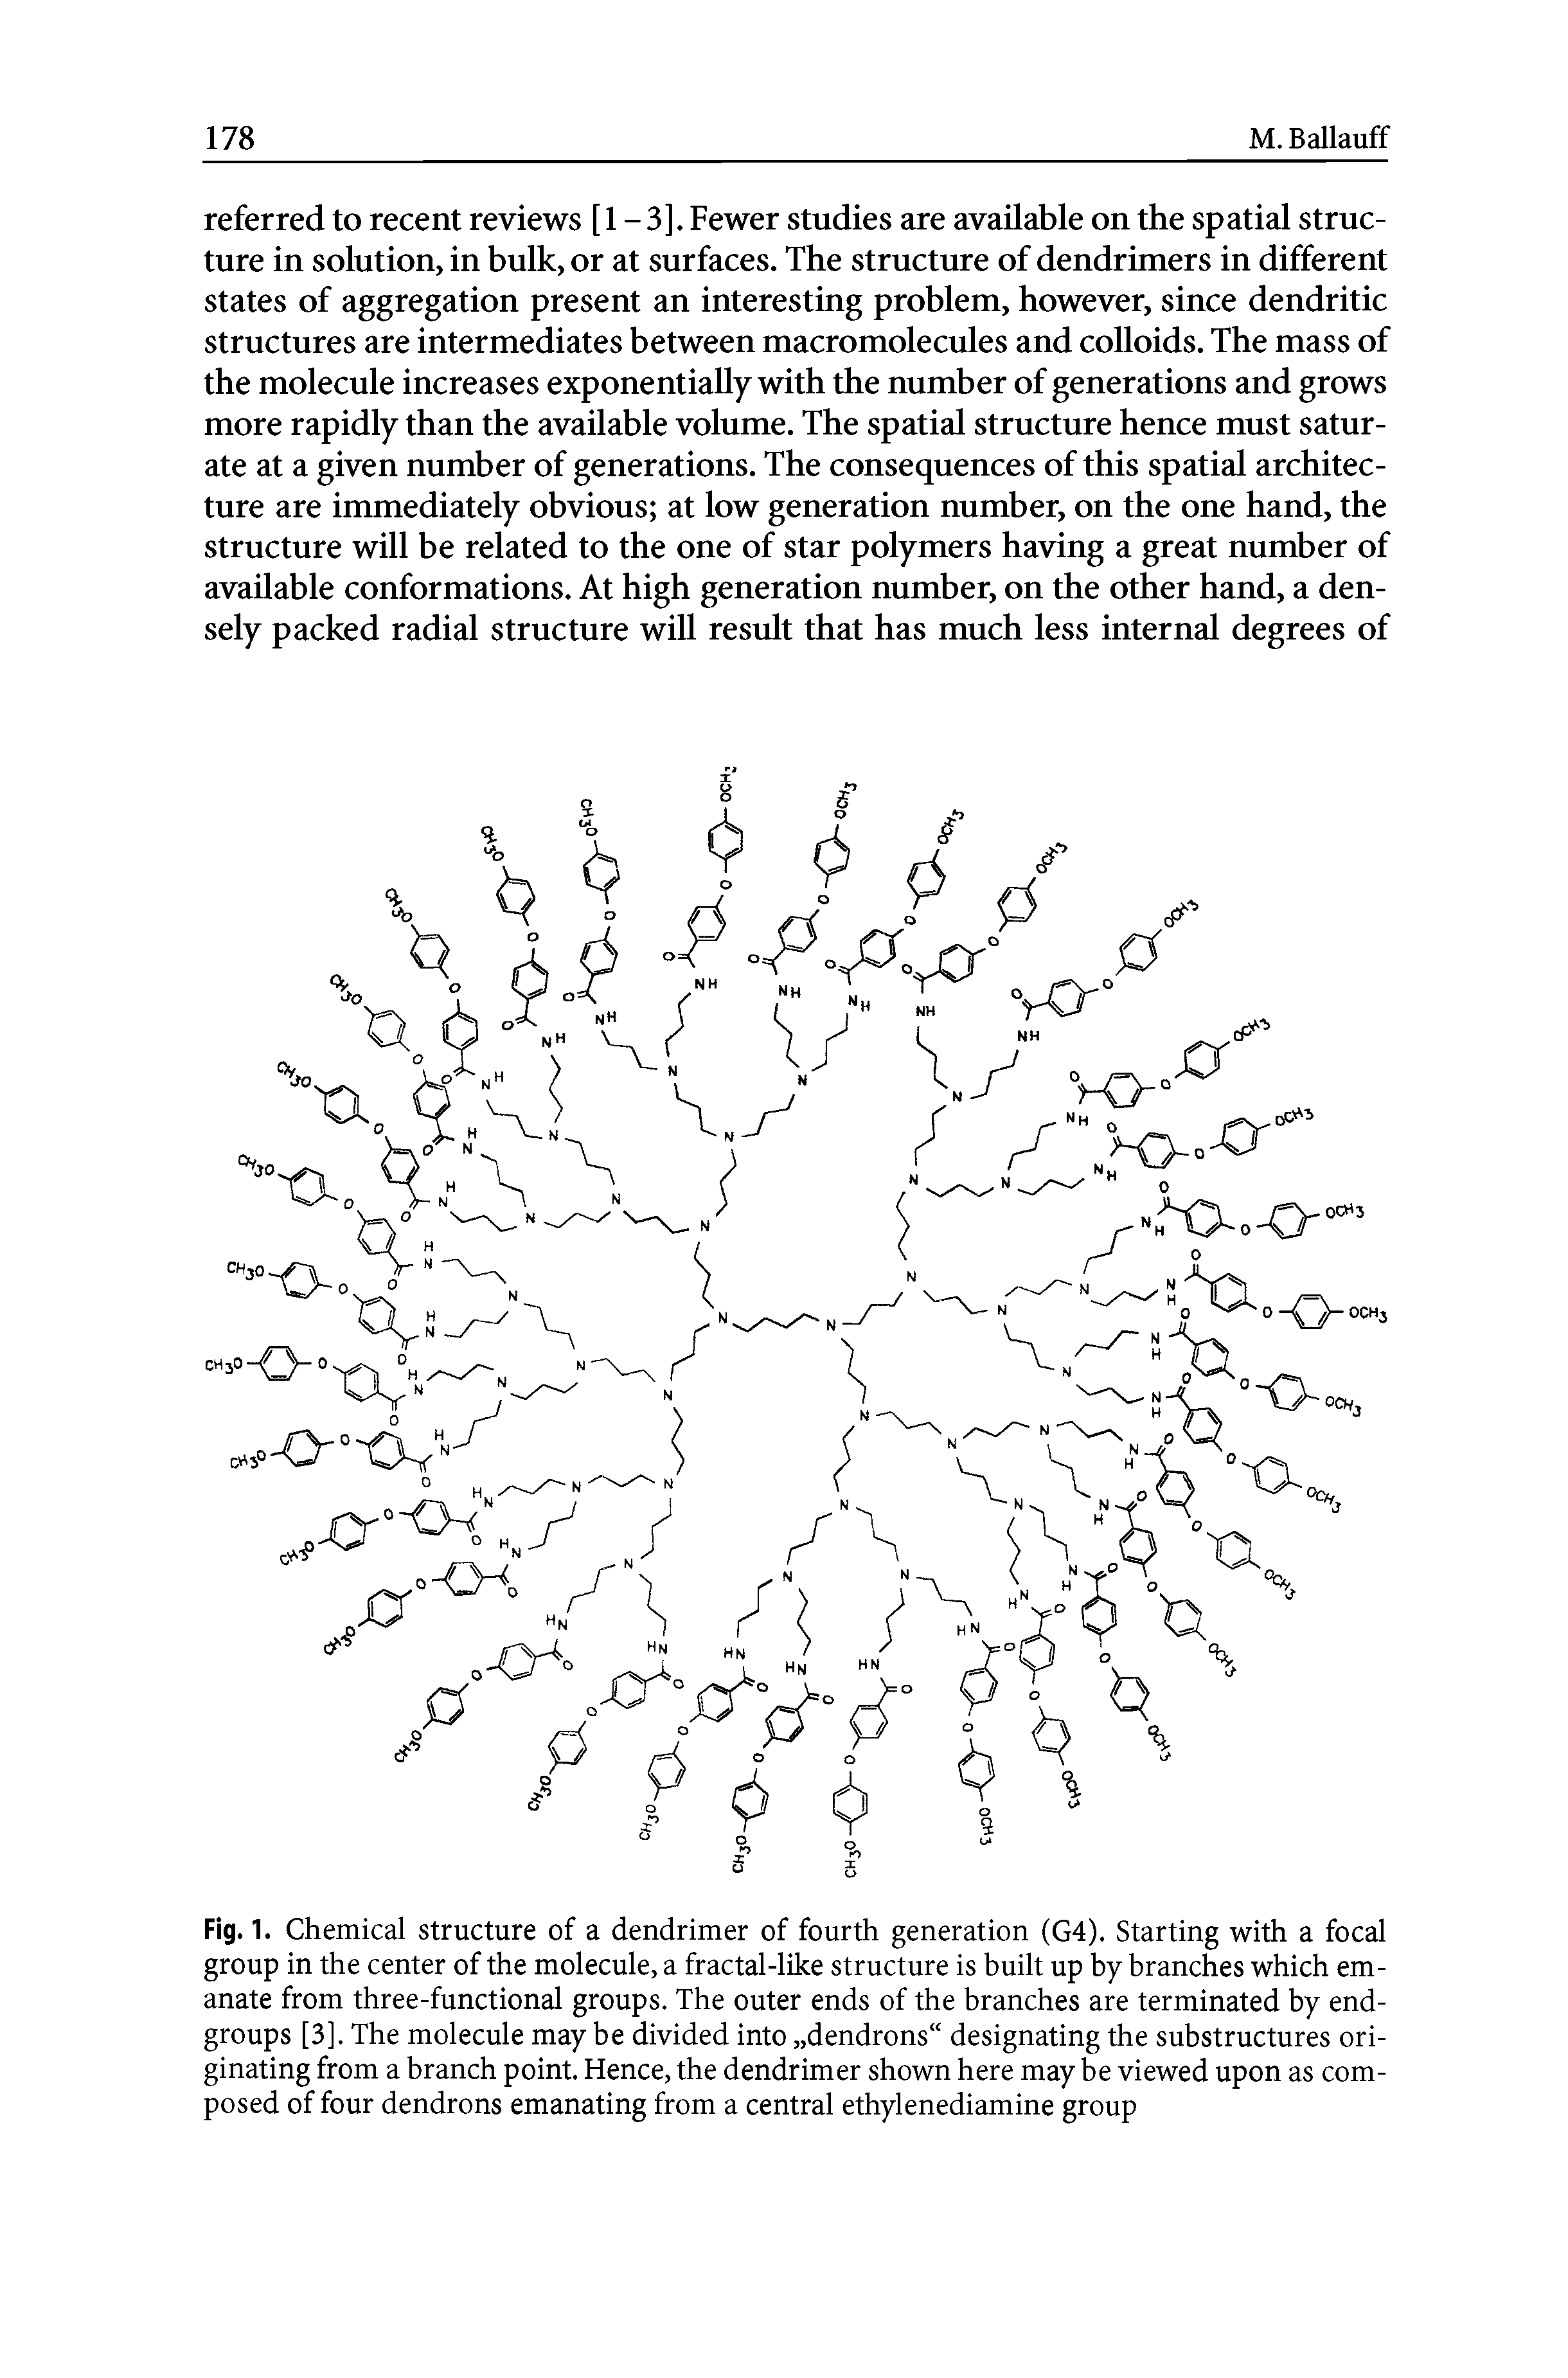 Fig. 1. Chemical structure of a dendrimer of fourth generation (G4). Starting with a focal group in the center of the molecule, a fractal-like structure is built up by branches which emanate from three-functional groups. The outer ends of the branches are terminated by end-groups [3]. The molecule may be divided into dendrons designating the substructures originating from a branch point. Hence, the dendrimer shown here may be viewed upon as composed of four dendrons emanating from a central ethylenediamine group...